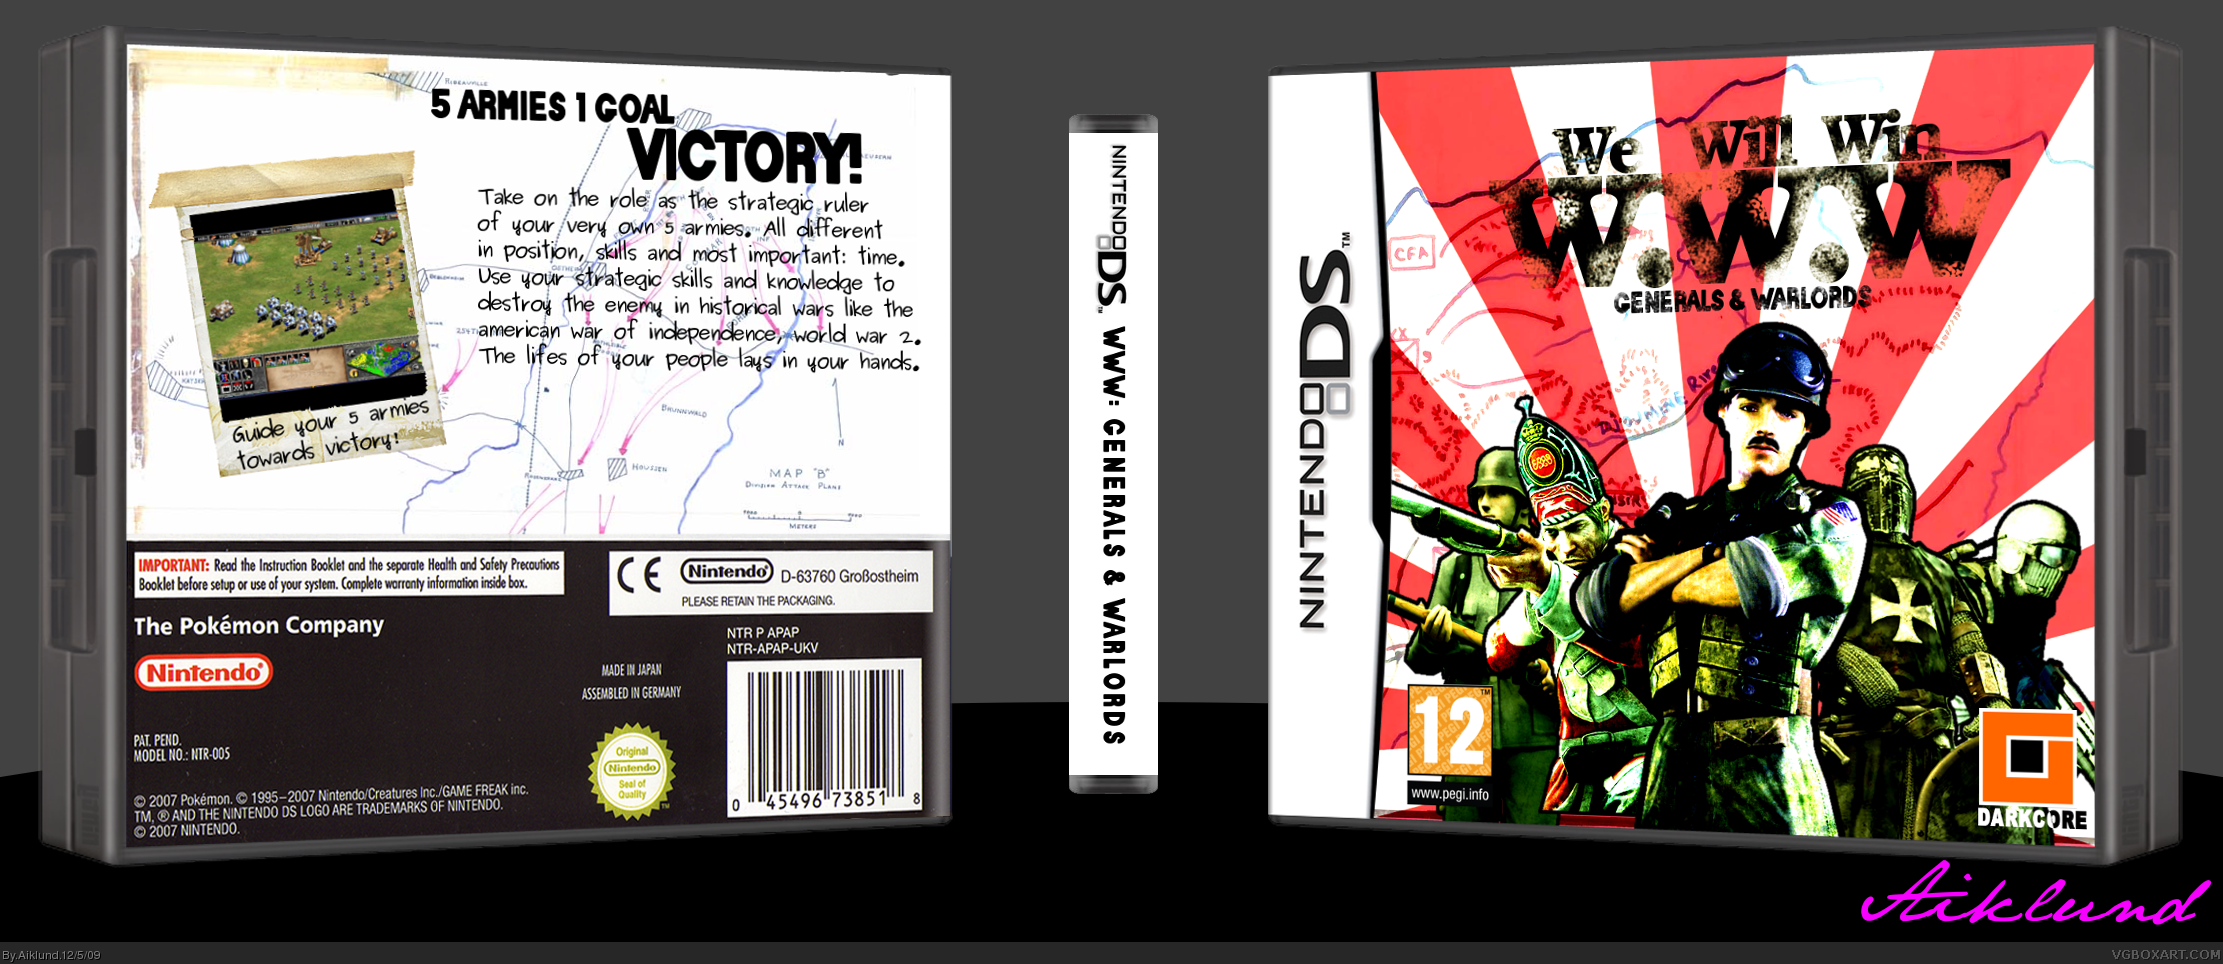 We Will Win: Generals & Warlords box cover